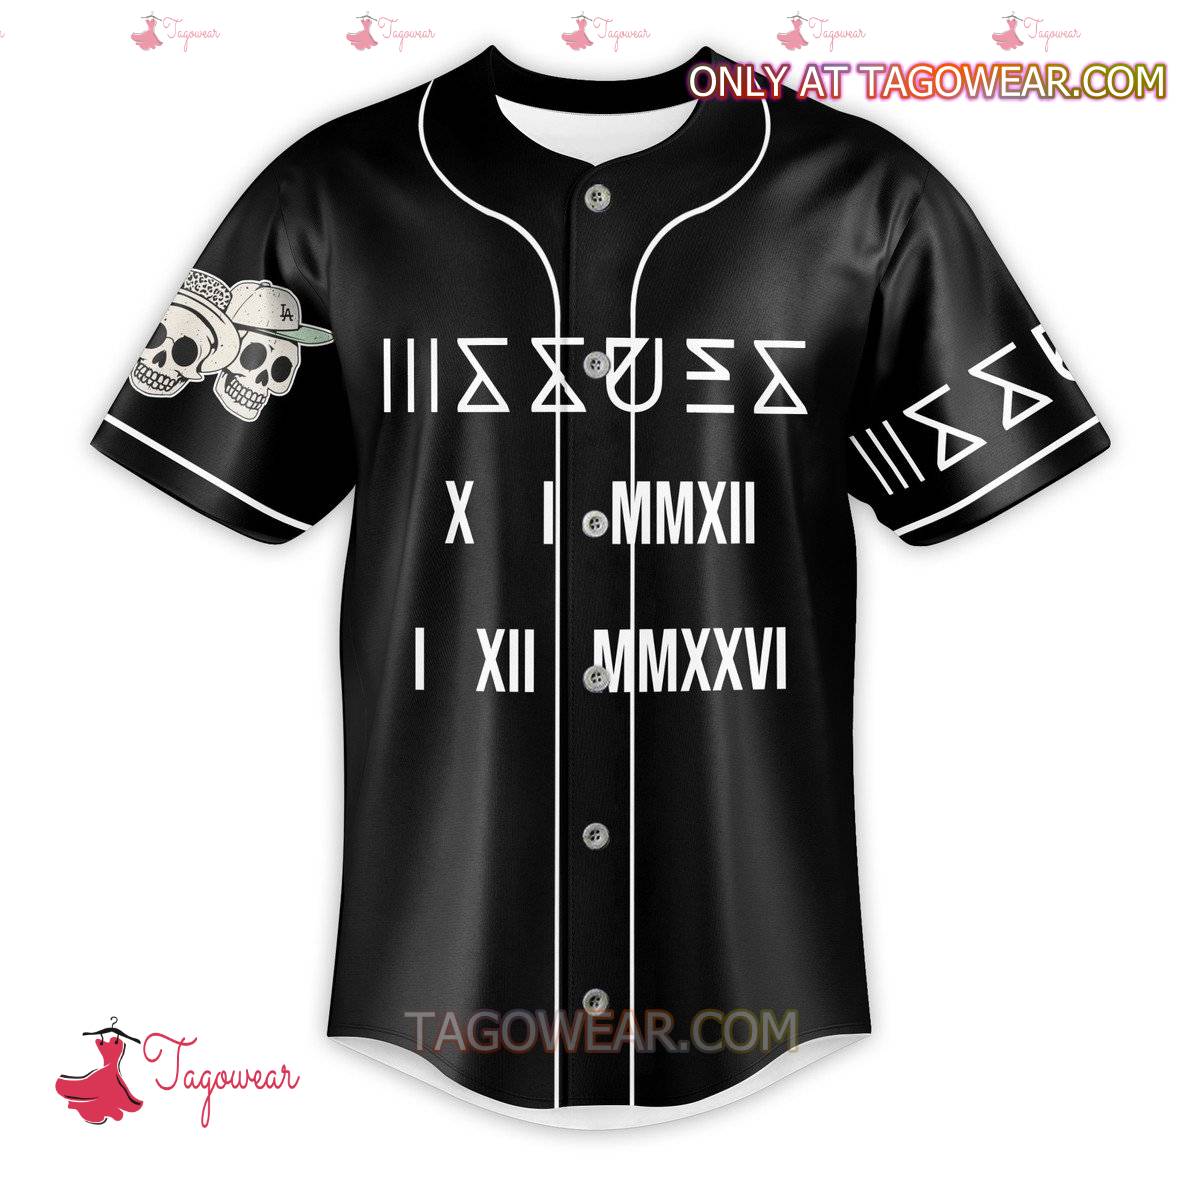 Issues-Farewell-Shows-Baseball-Jersey a